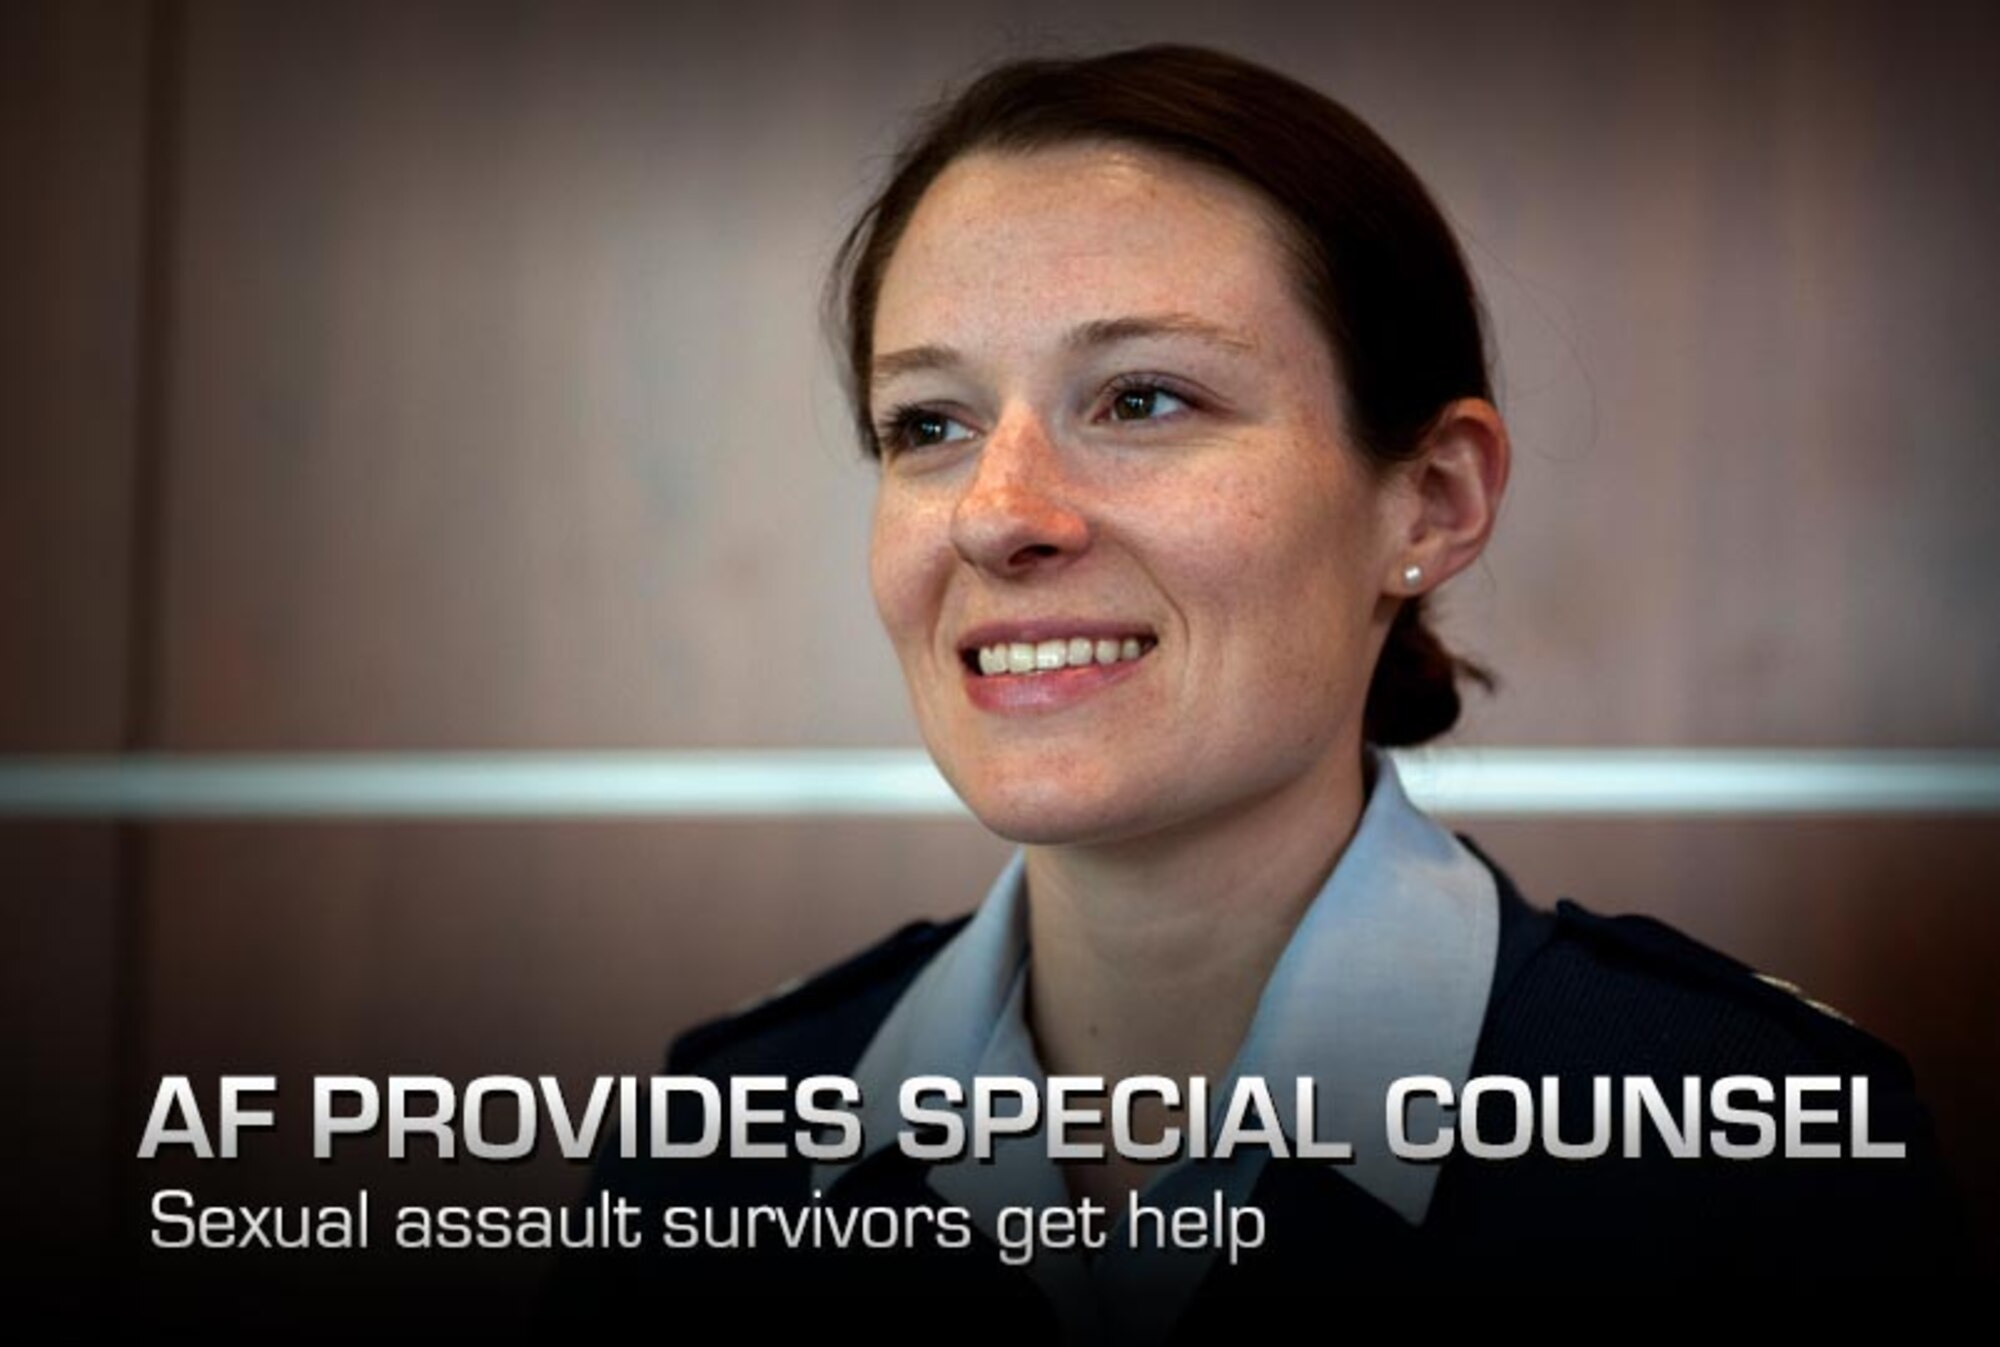 Capt. Allison DeVito is the chief of Victims Issues and Policy branch for Air Force and helps manage the Special Victims' Counsel program. The SVC provides independent legal representation through an assigned Air Force attorney to Airmen, who report they are the victims of sexual assault. (U.S. Air Force Photo by Senior Airman Carlin Leslie)
